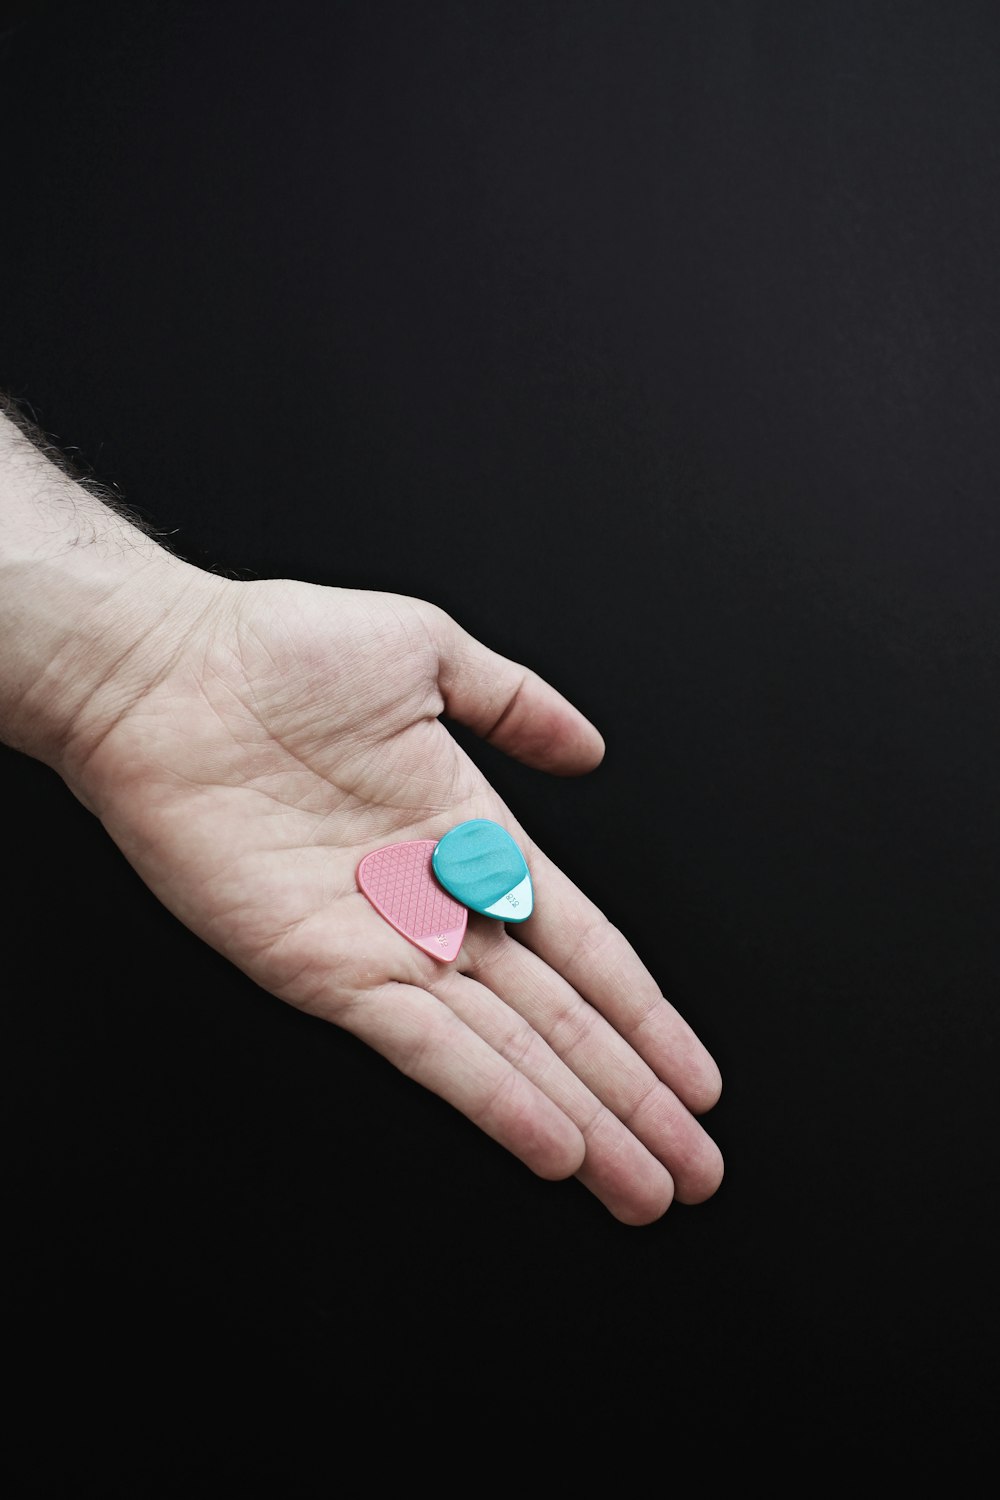 person holding blue oval medication pill